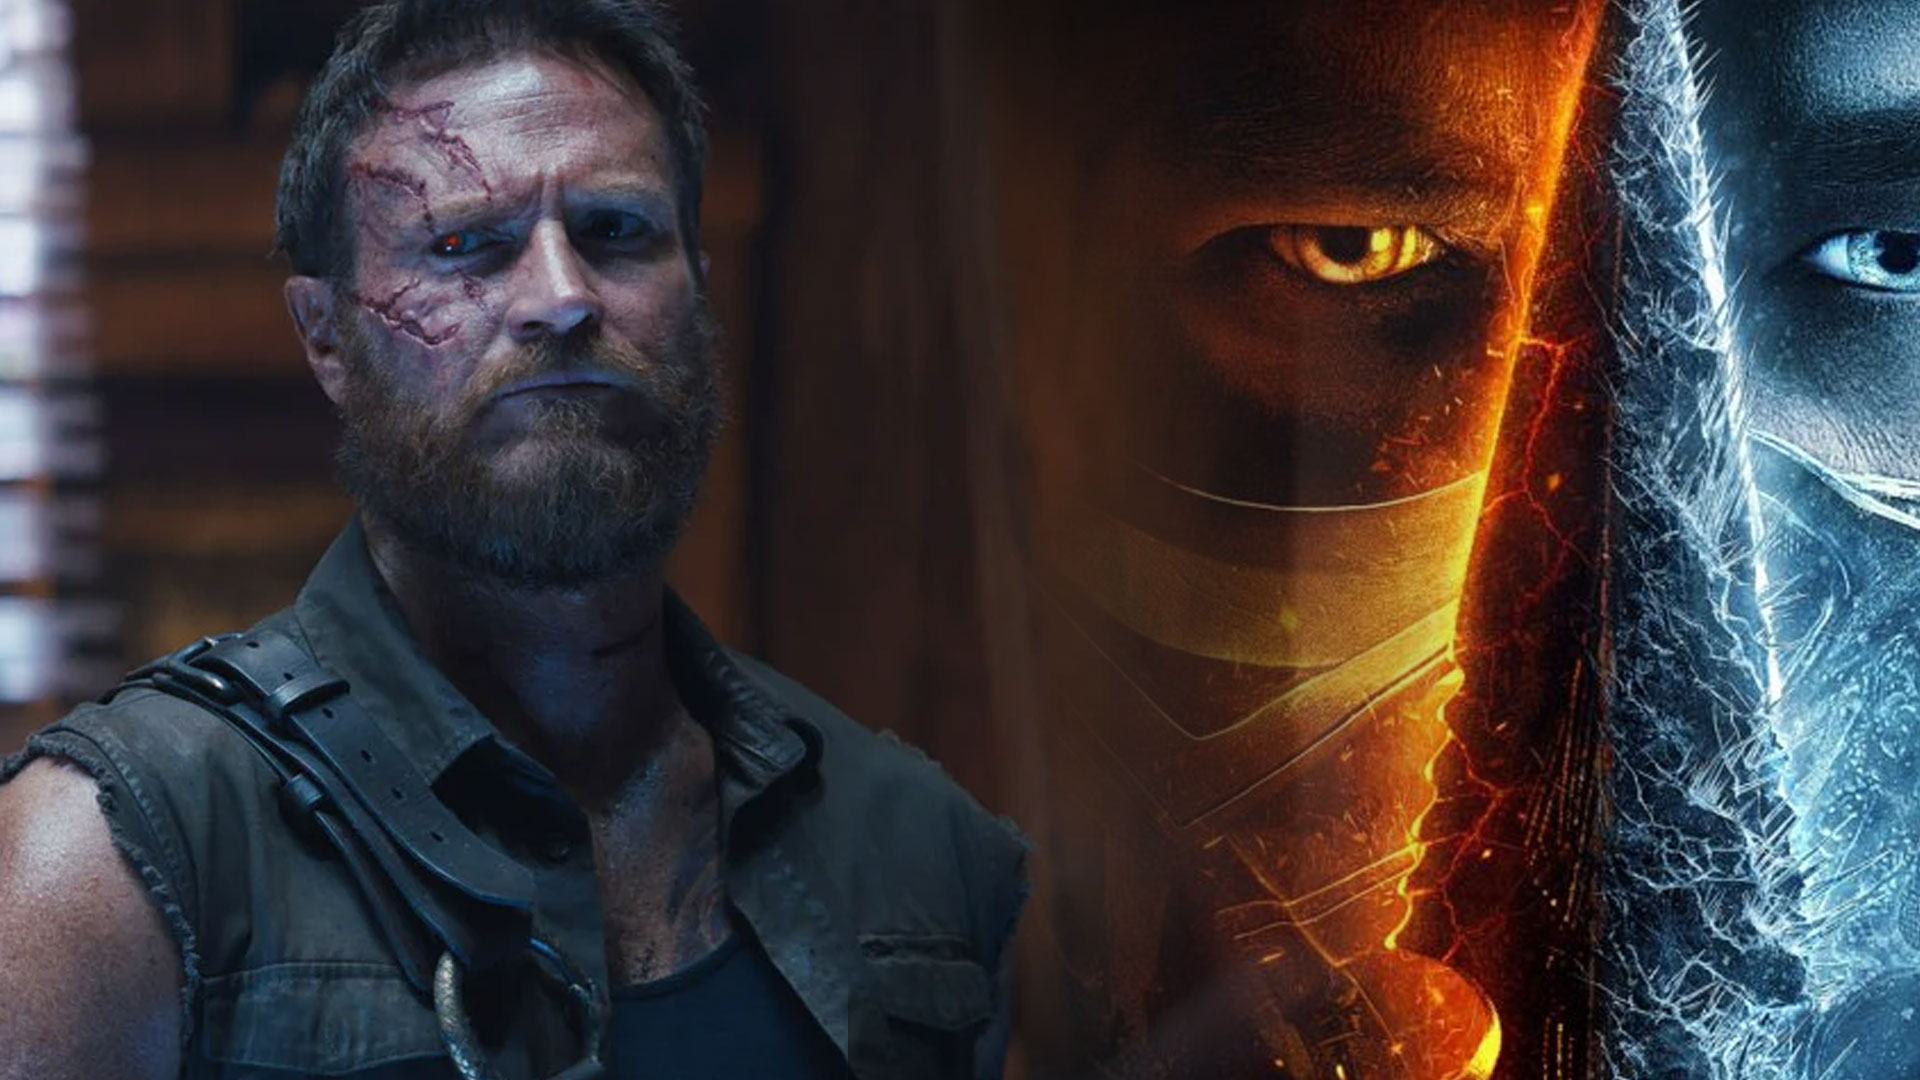 GeekSidePH - Josh Lawson is Kano! Warner Bros. has released official motion  movie posters for the upcoming reboot of the highly acclaimed fighting game Mortal  Kombat which is set to be released